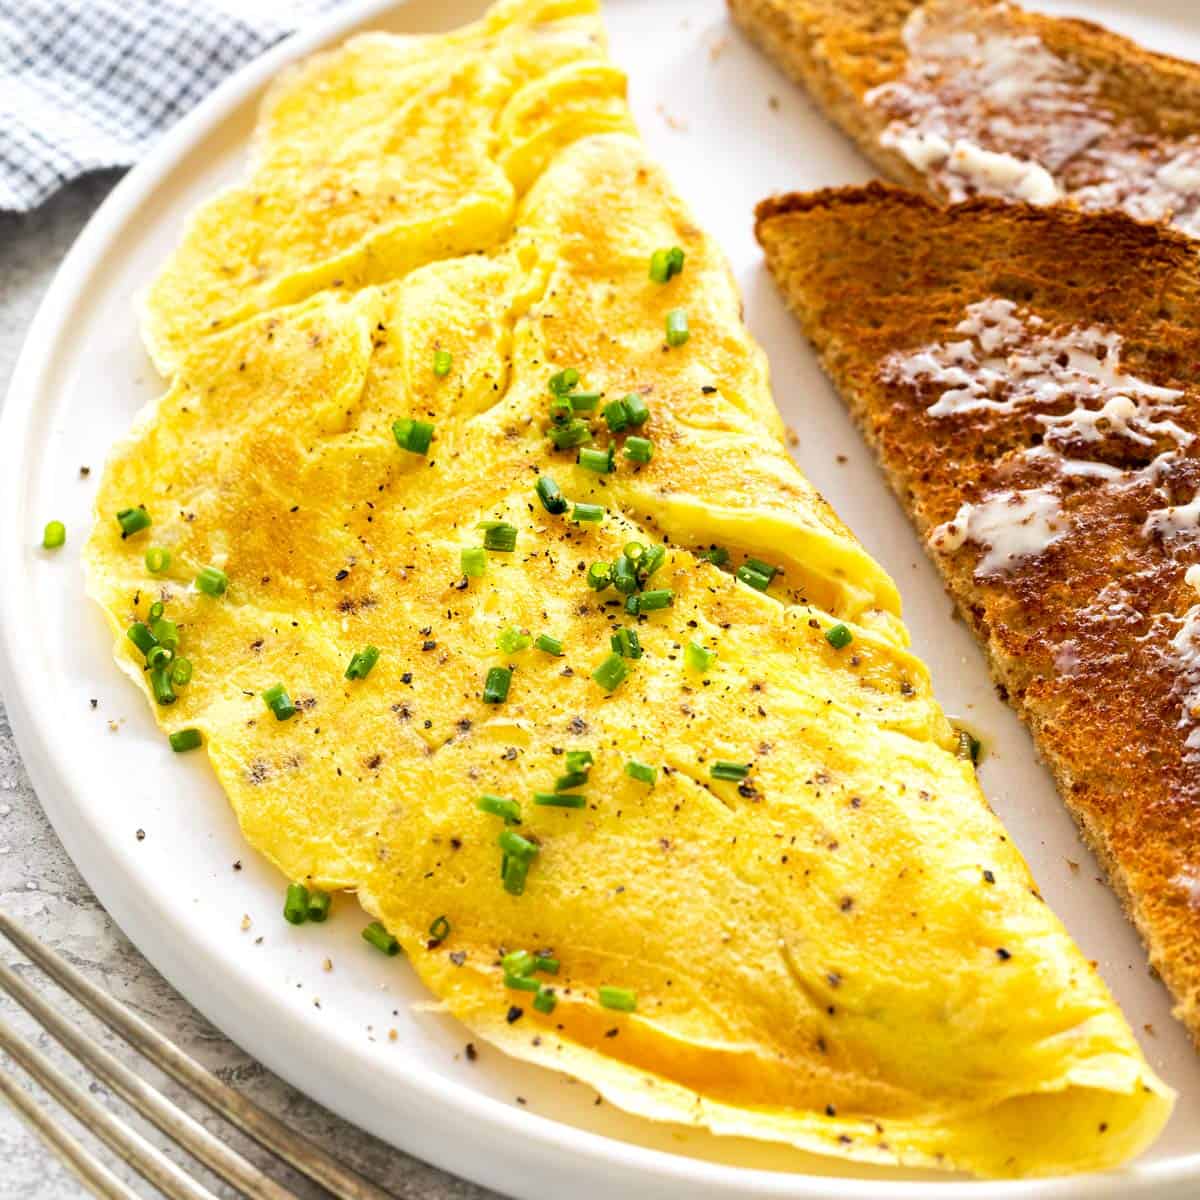 Omelette Al-fedaous